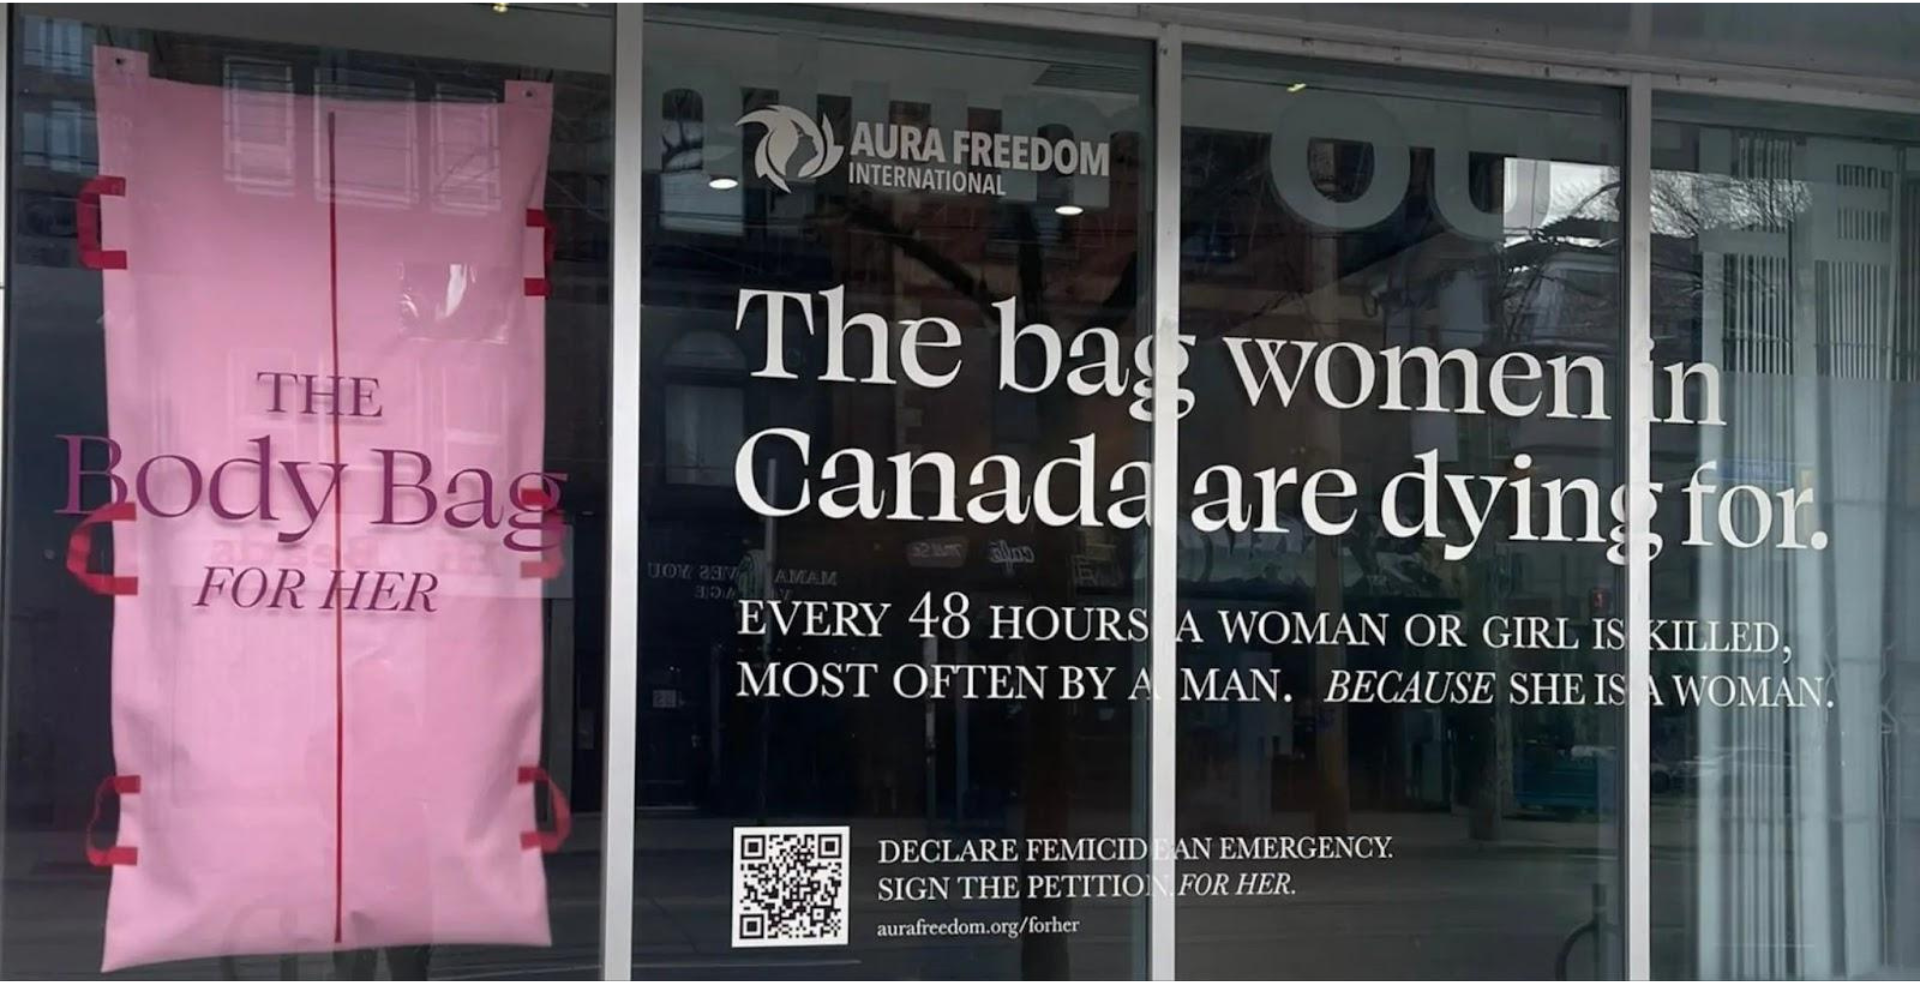 A pink body bag hangs in the window of Toronto gallery It’s OK* Studios on Nov. 24, 2023, as part of a controversial campaign by Canadian charity Aura Freedom International to raise awareness about femicide.